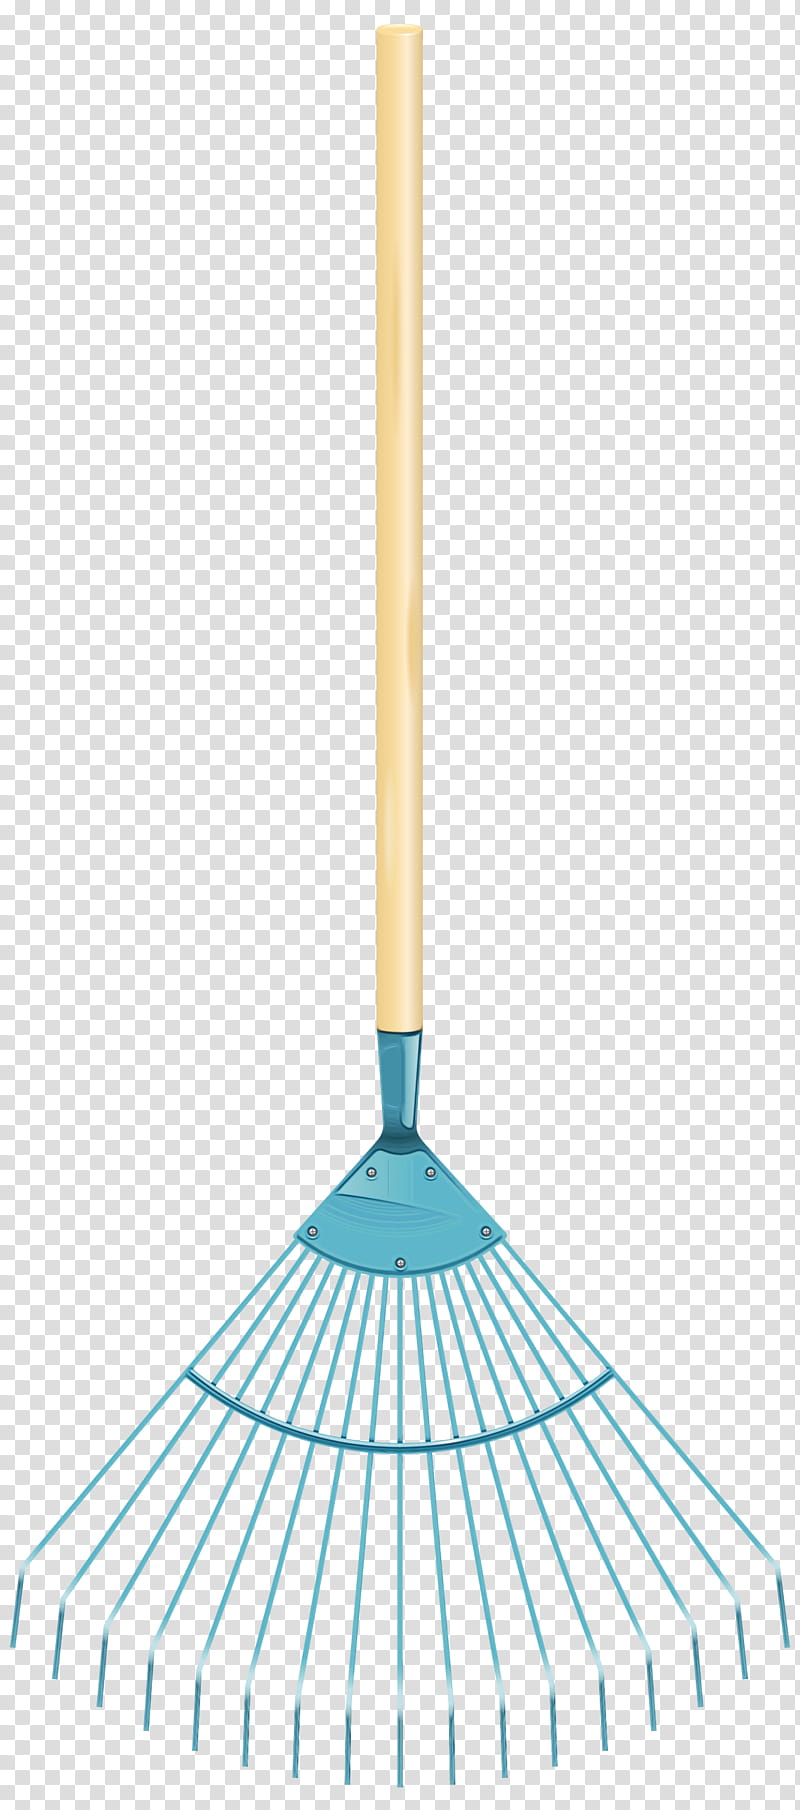 Angle Household Cleaning Supply, Line, Household Supply, Broom, Rake transparent background PNG clipart